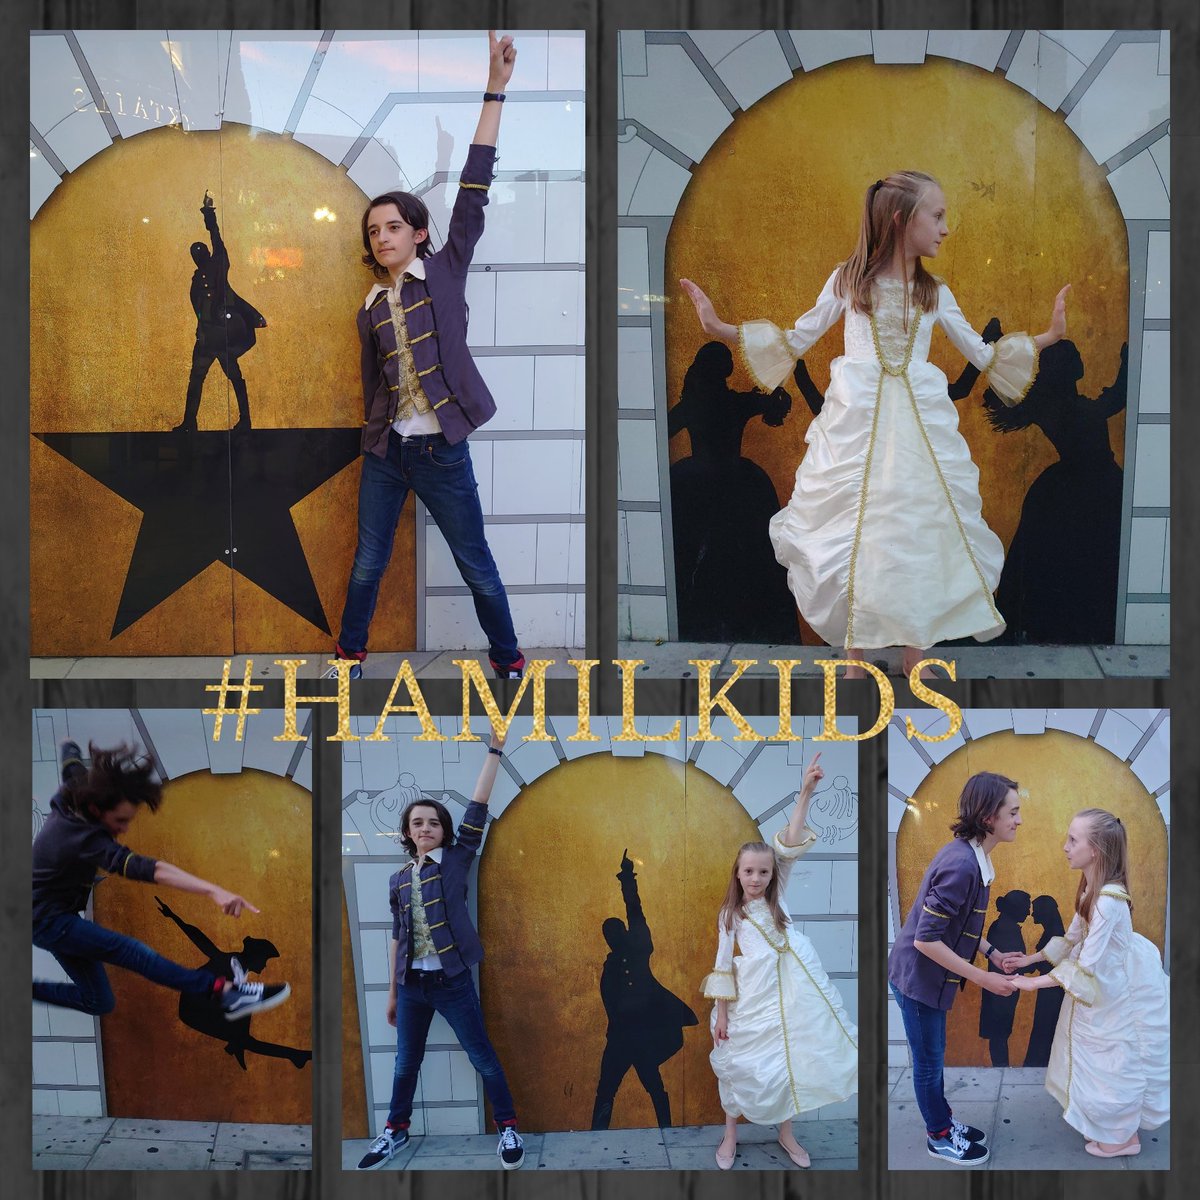 Dream come true for 2 superfans to be in the room where it happens @HamiltonWestEnd #hamilkids